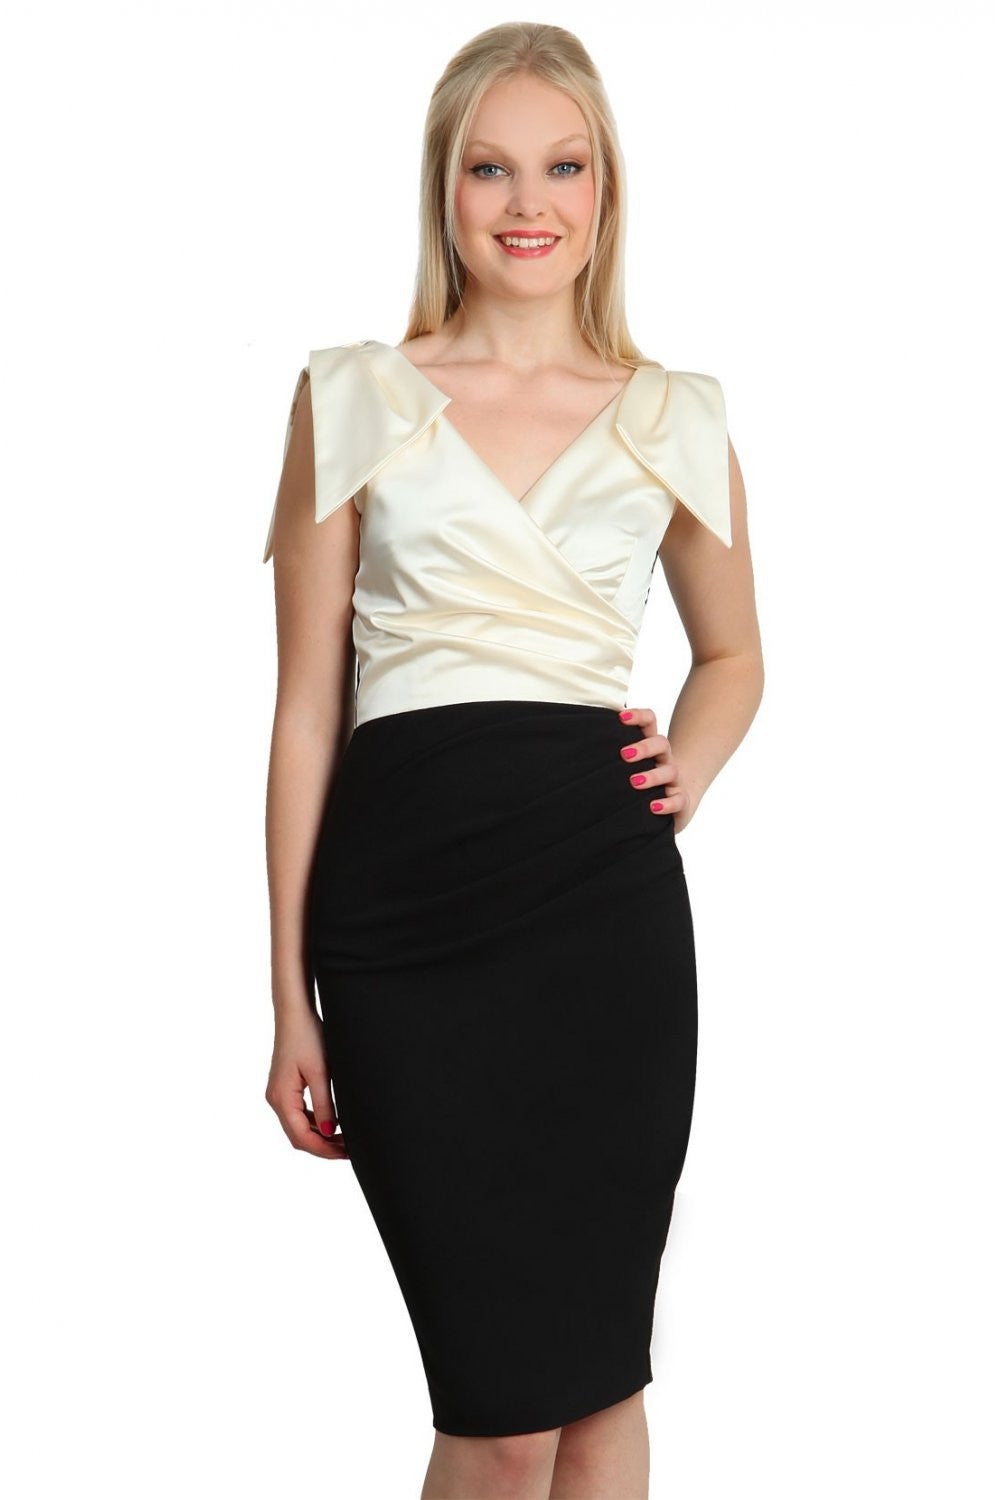 Model wearing the Diva Broadway Satin dress with satin bodice to front and pleating at the front in black and gardenia cream front image